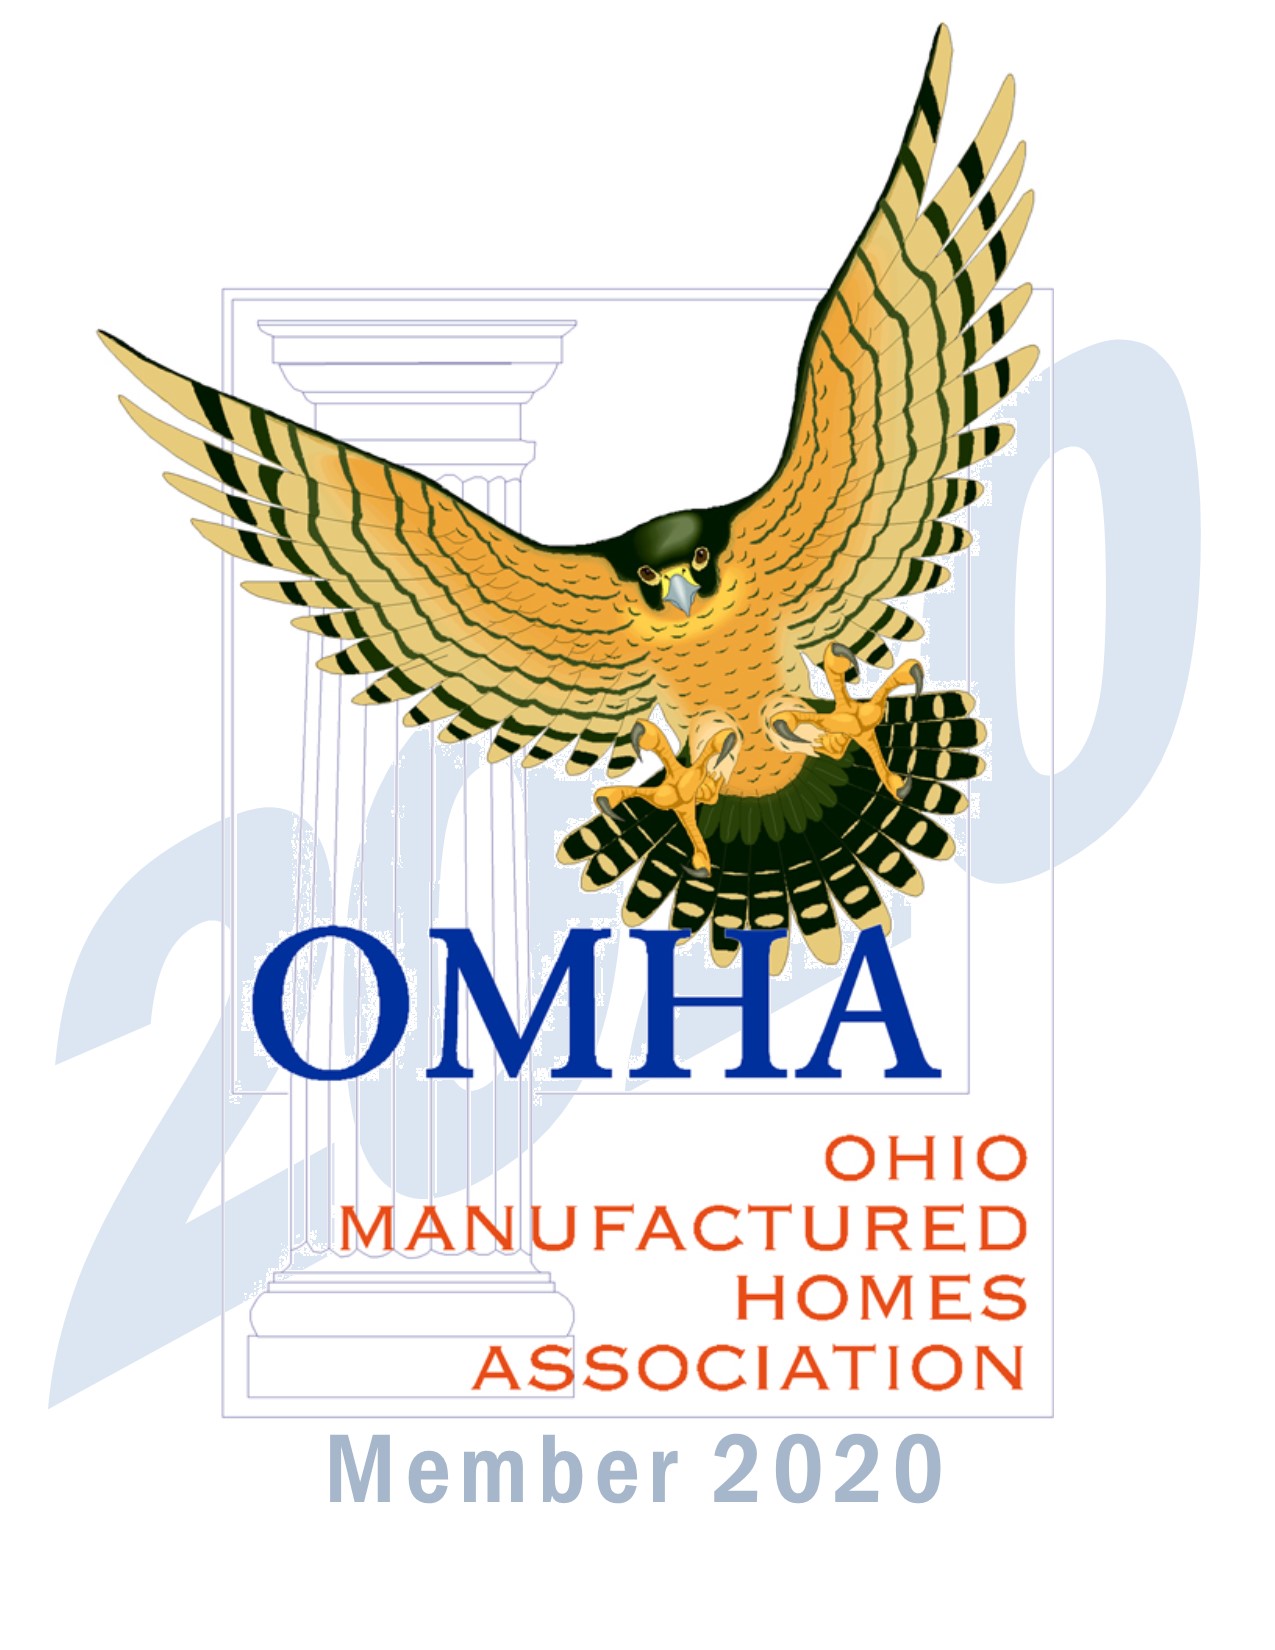 Ohio Manufactured Homes Association Member